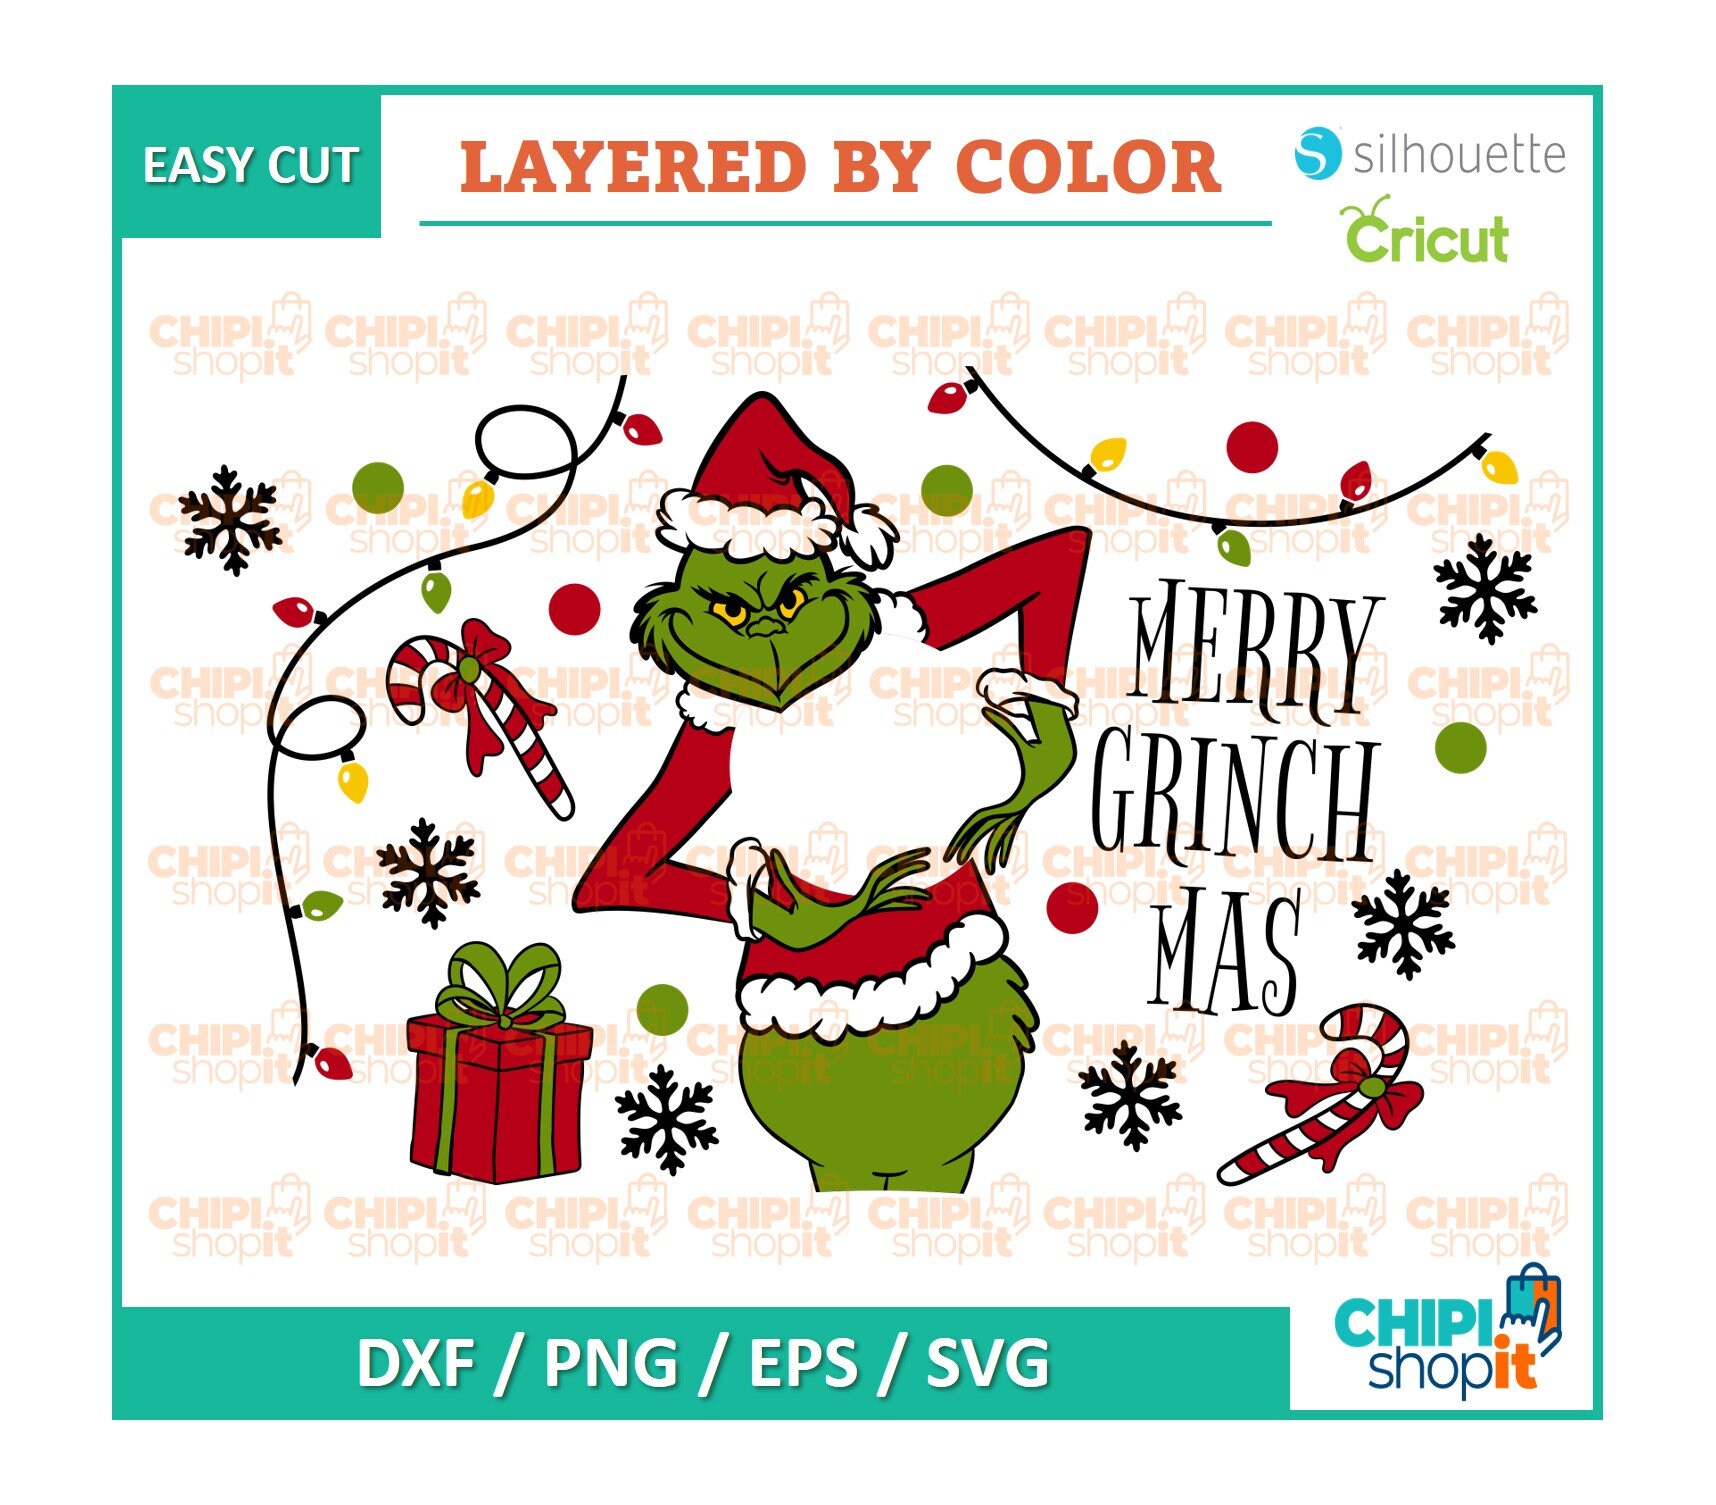 Grinch Christmas Stickers, 50 Pcs, Vinyl Waterproof Stickers For  Laptop,skateboard,water Bottles,computer,phone,guitar,anime Grinch Stickers  For